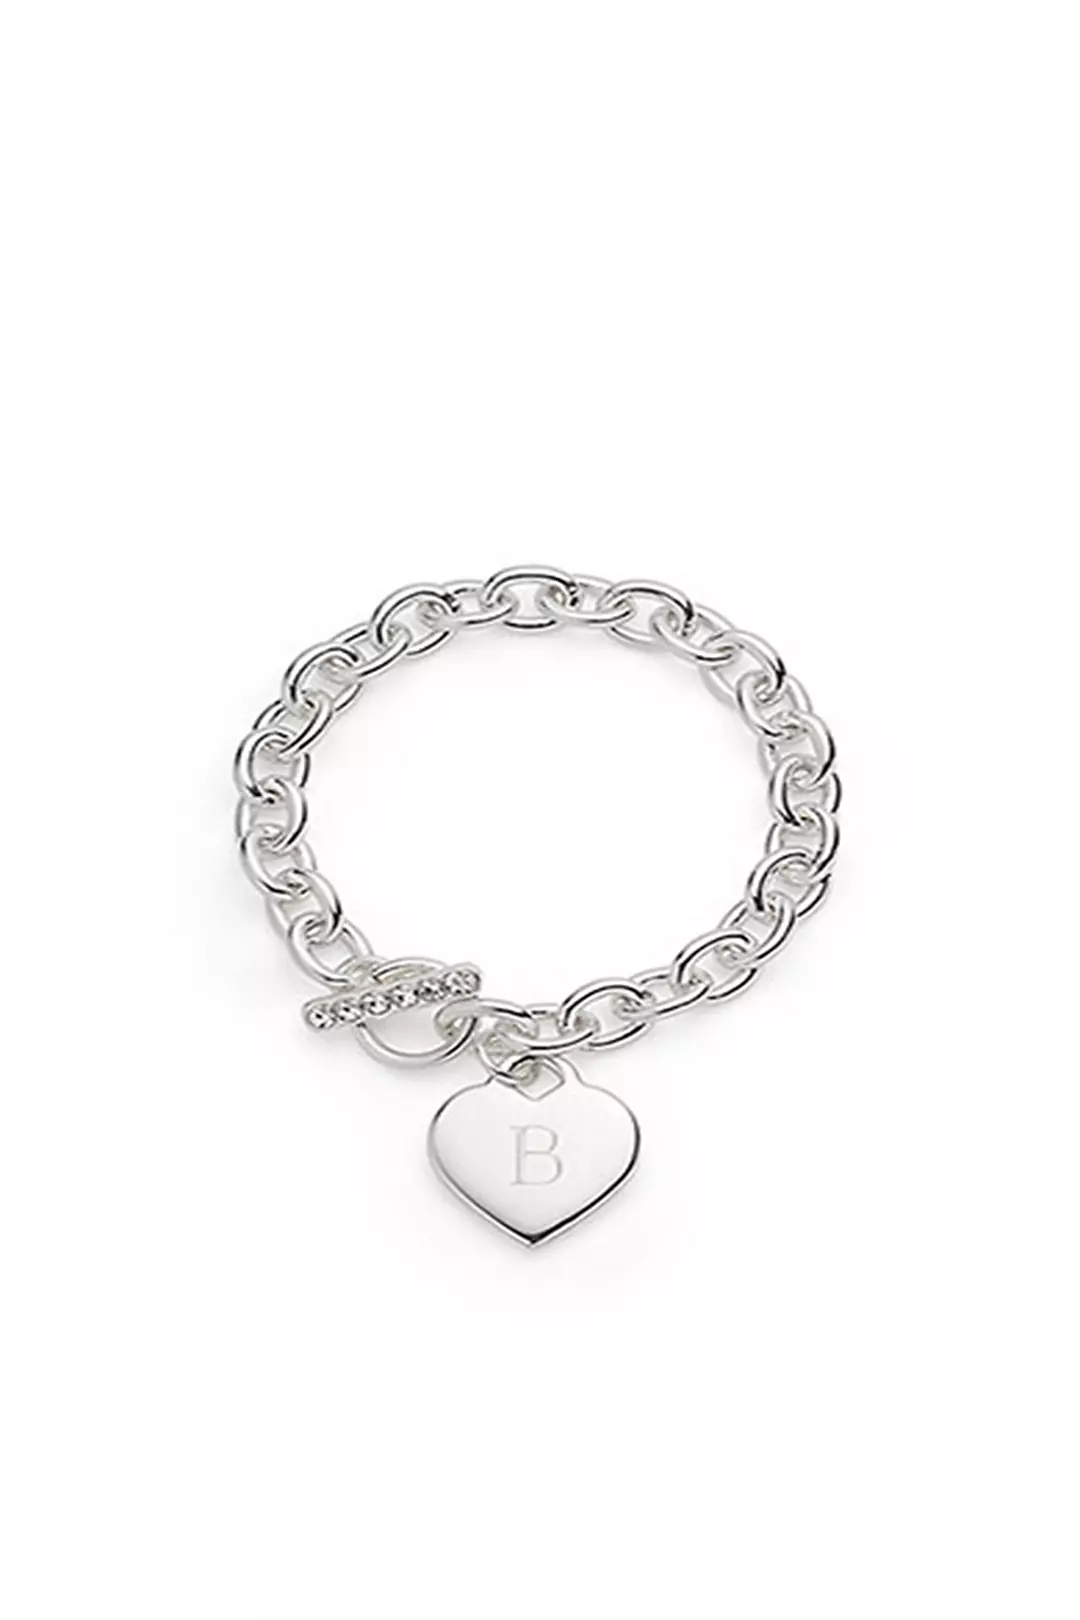 Personalized Silver Plated Heart Link Bracelet Image